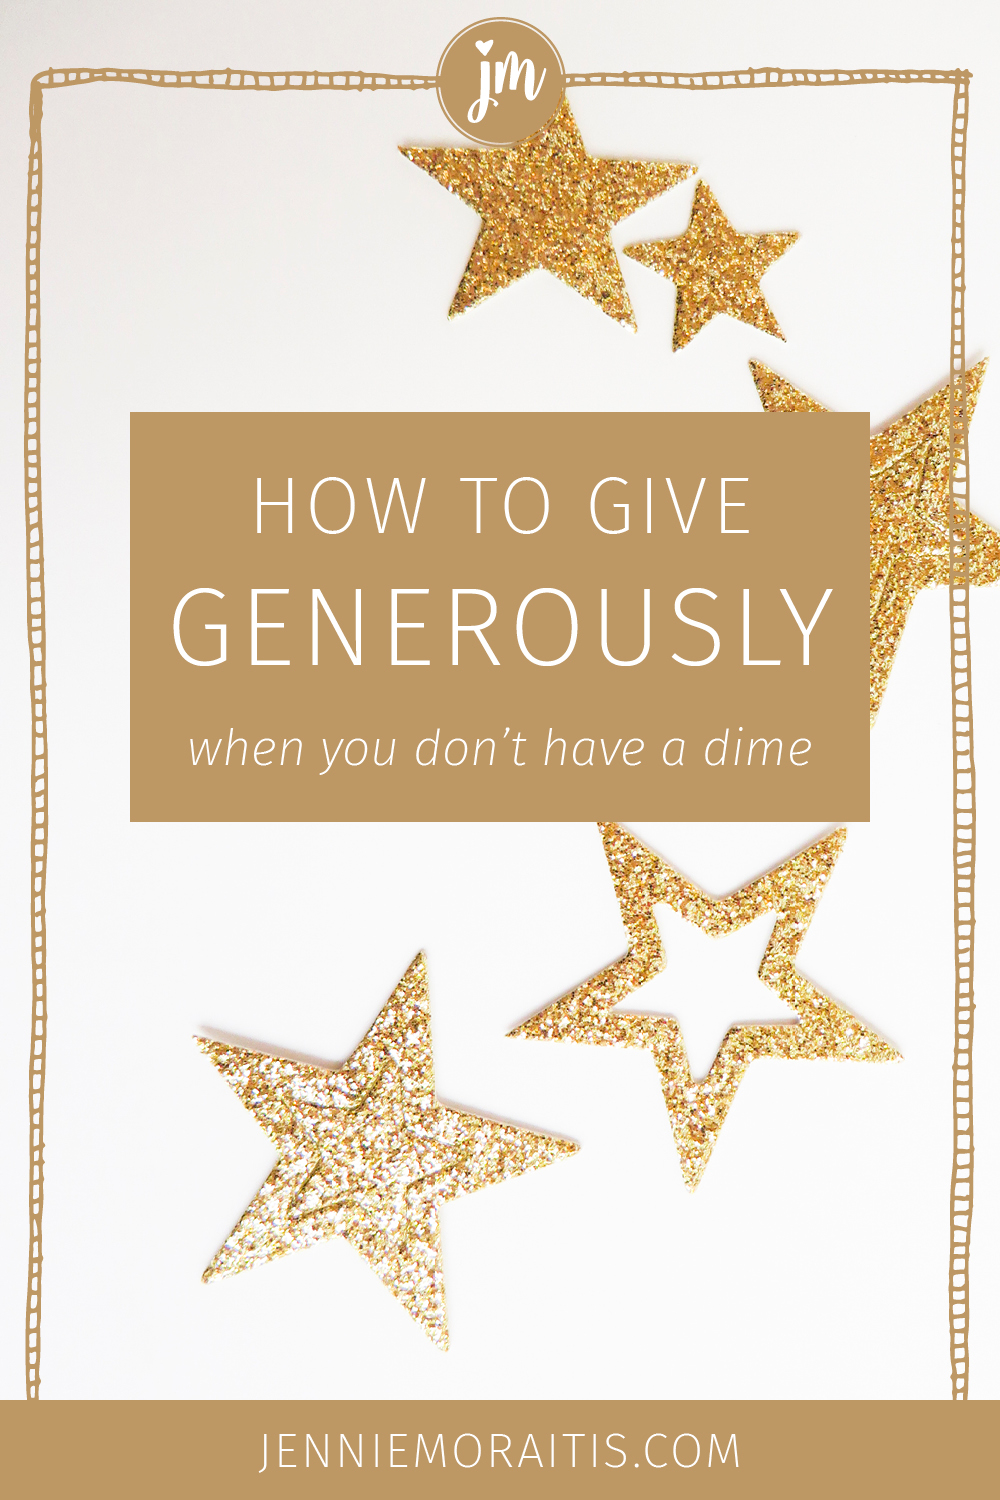 How to Give Generously When You Don’t Have A Dime